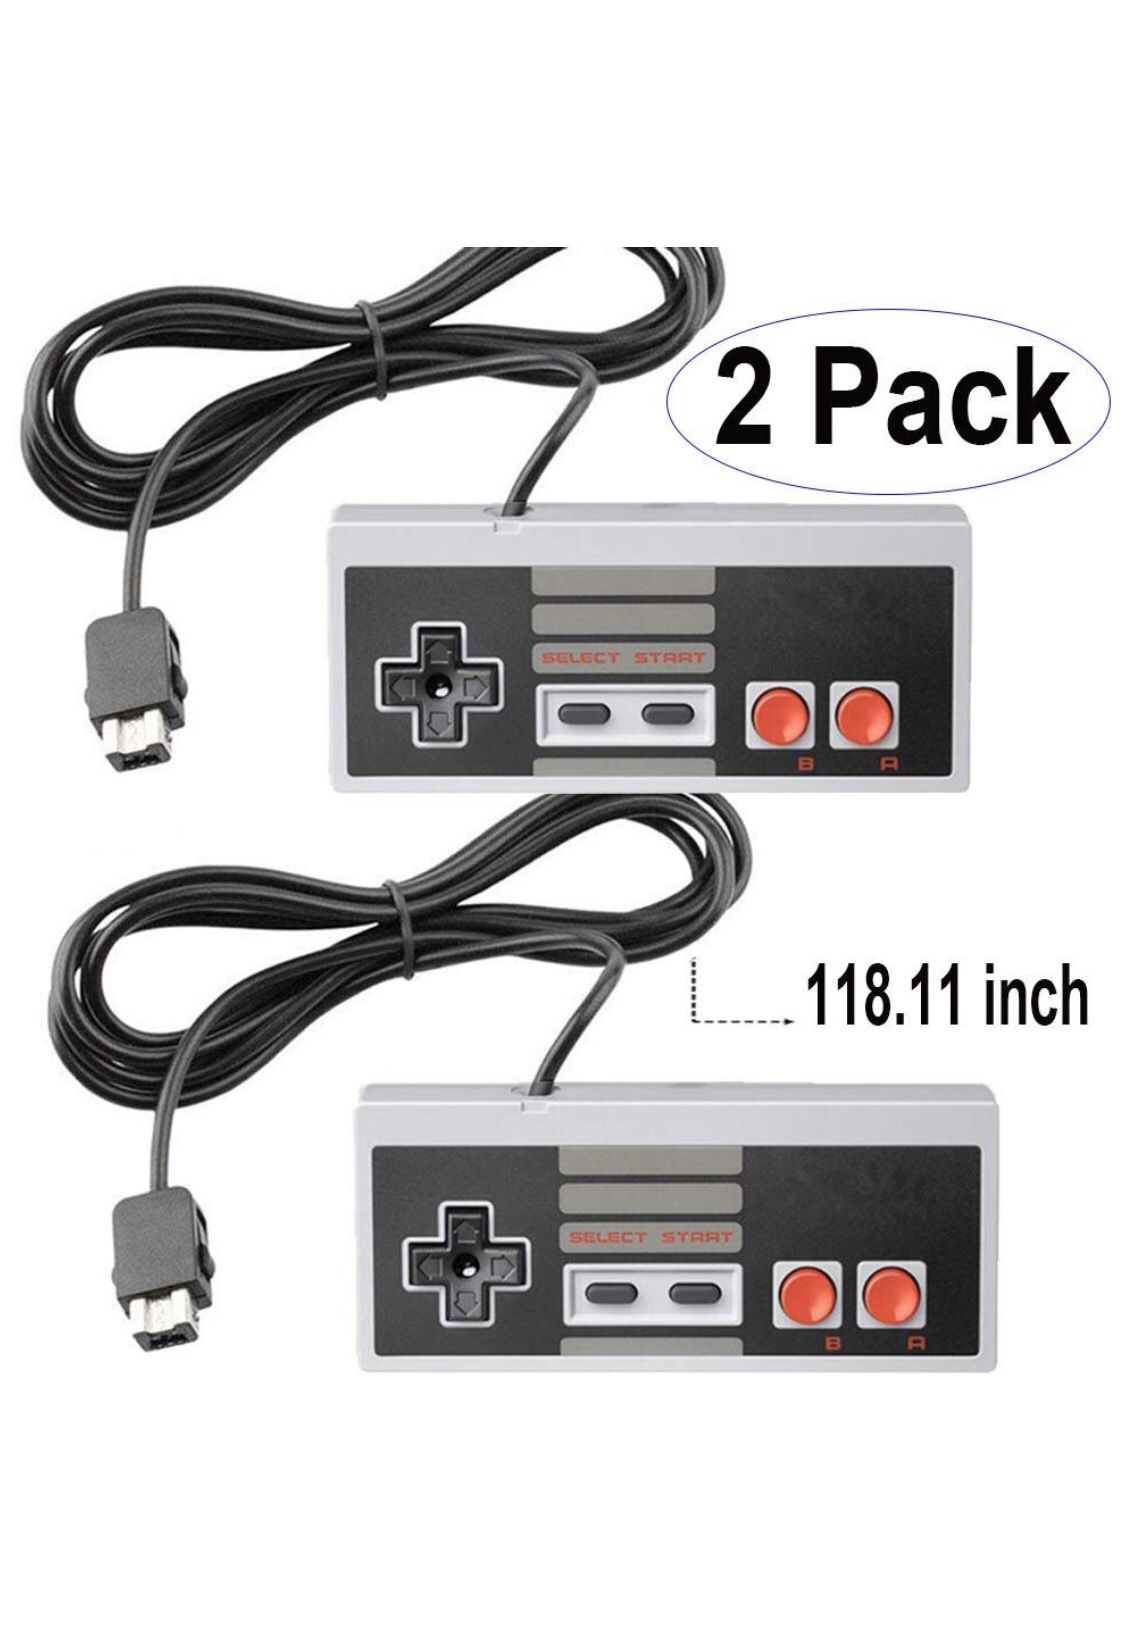 NES Classic Controller with 10FT Cable [2-Pack] for NES Classic Edition MINI,SNES Classic 2017 - Wired Joypad/Gamepad Console